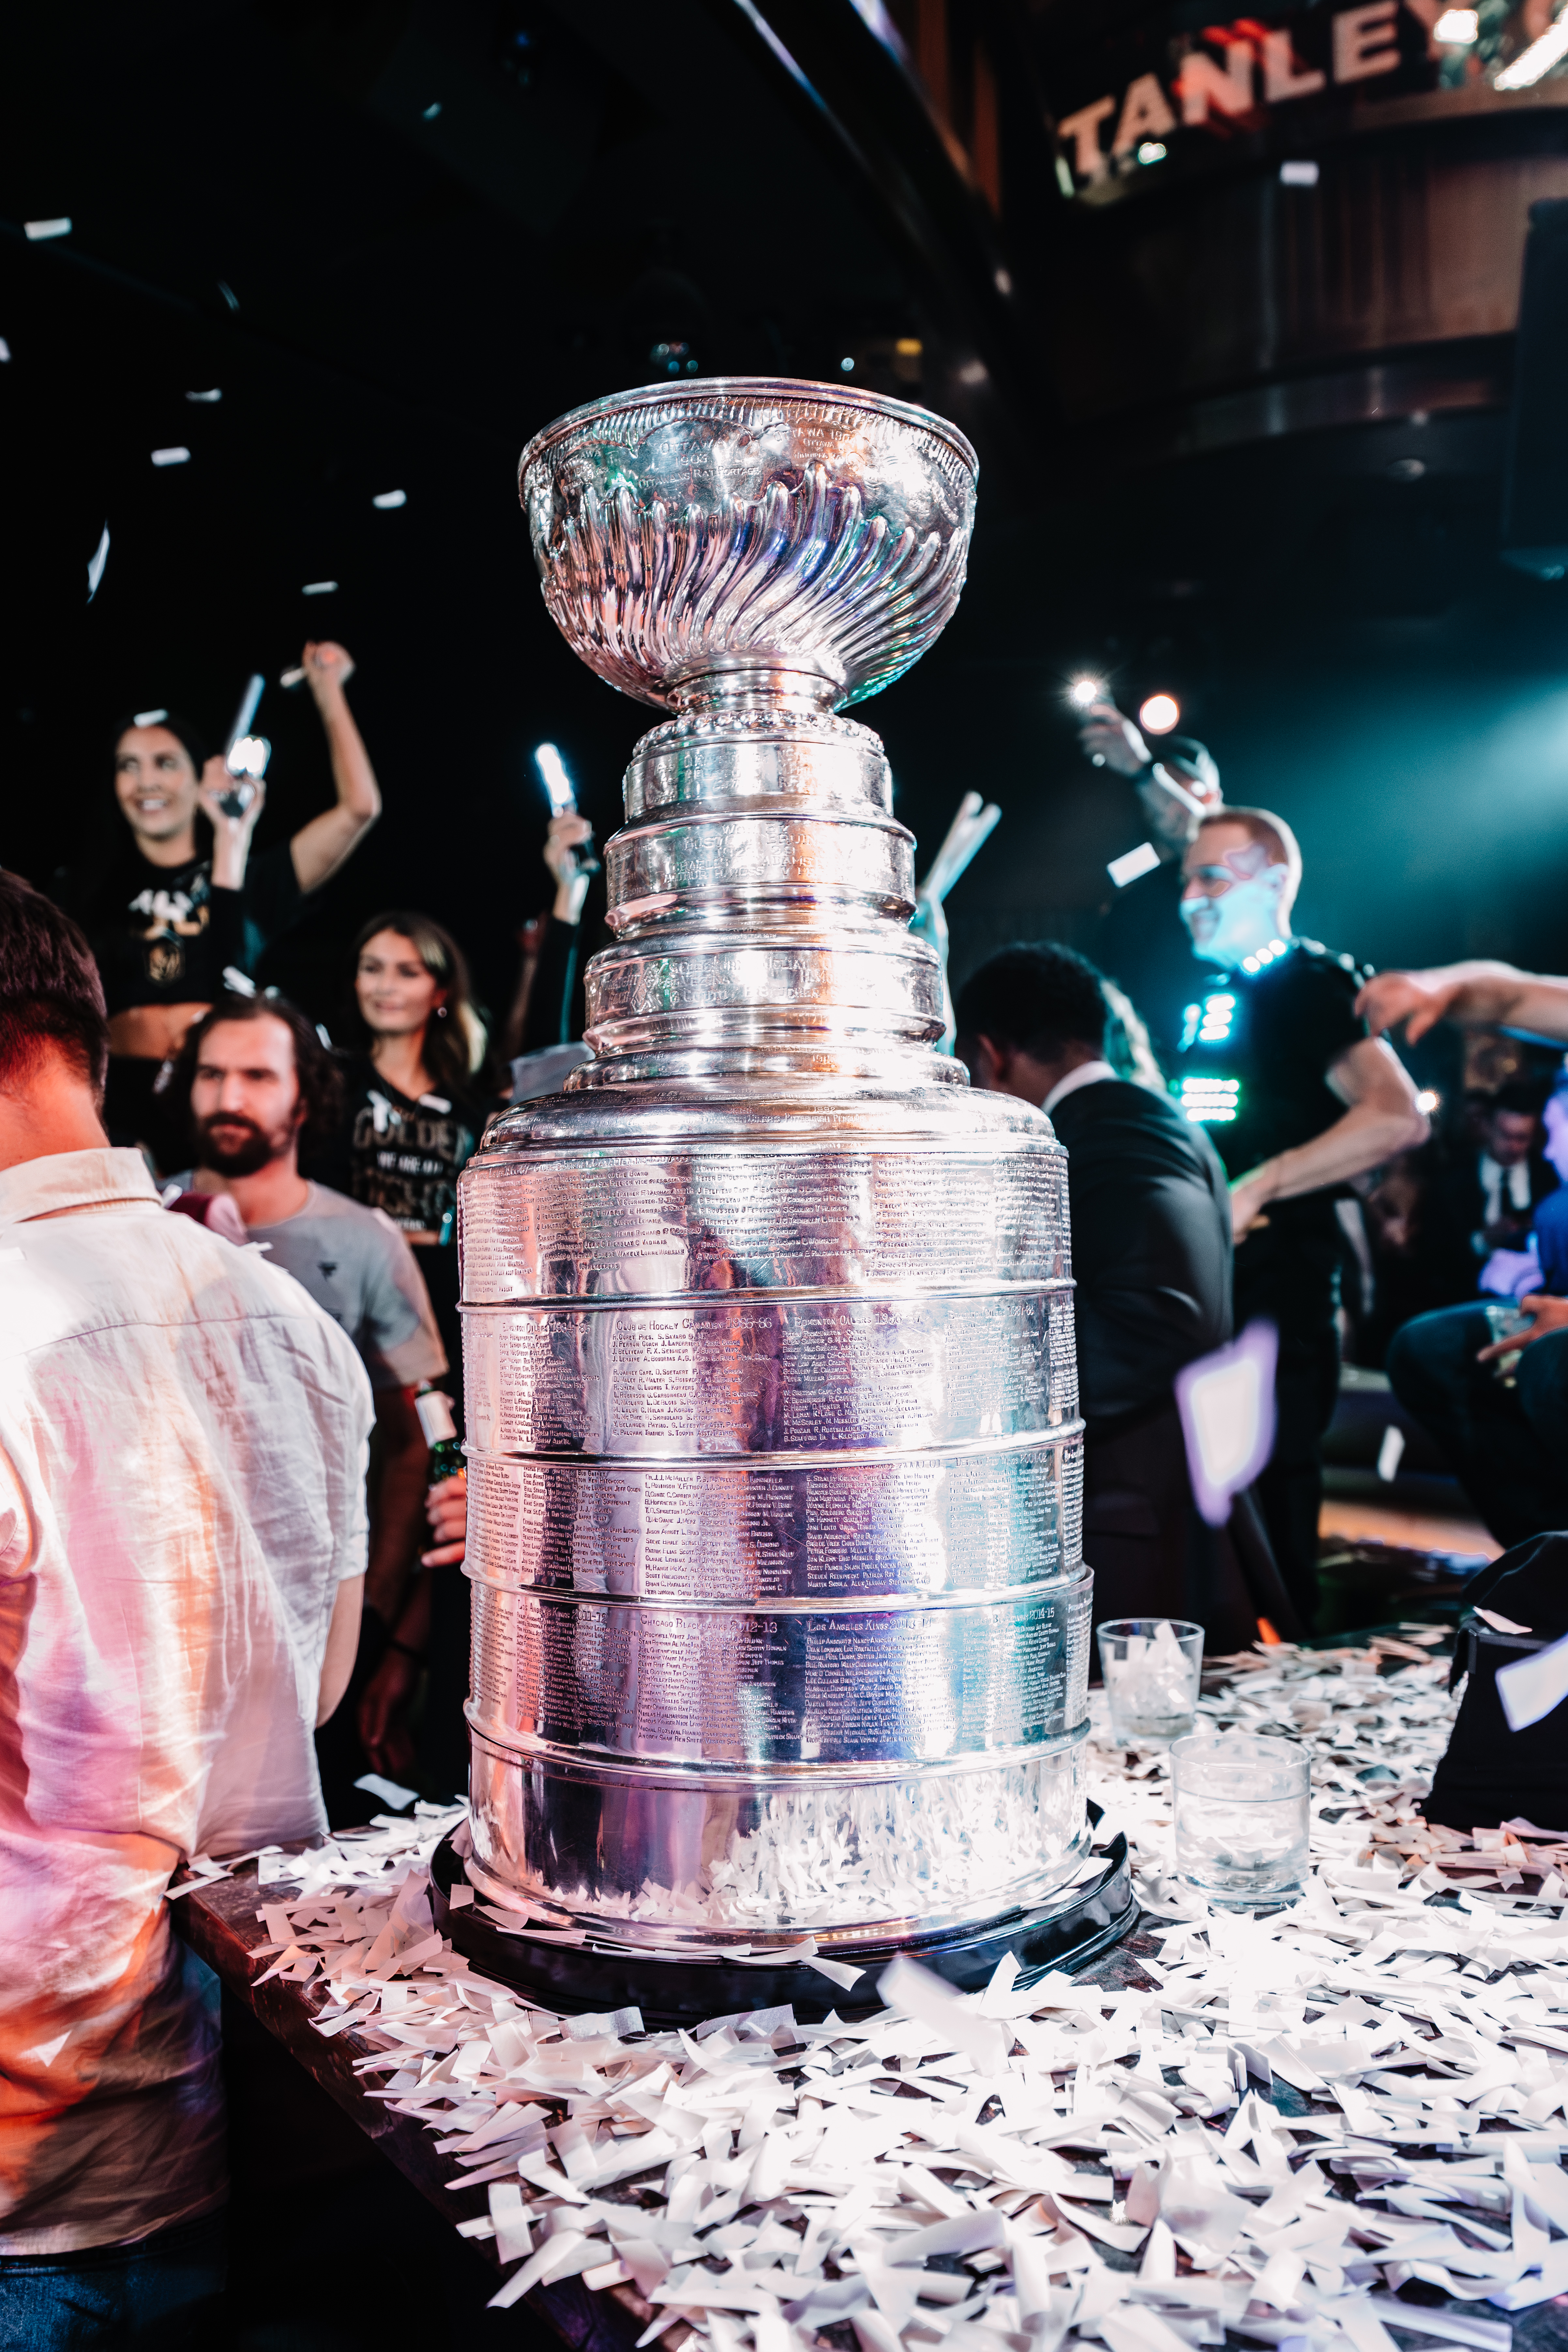 Golden Knights Stanley Cup champion player to celebrate—by working